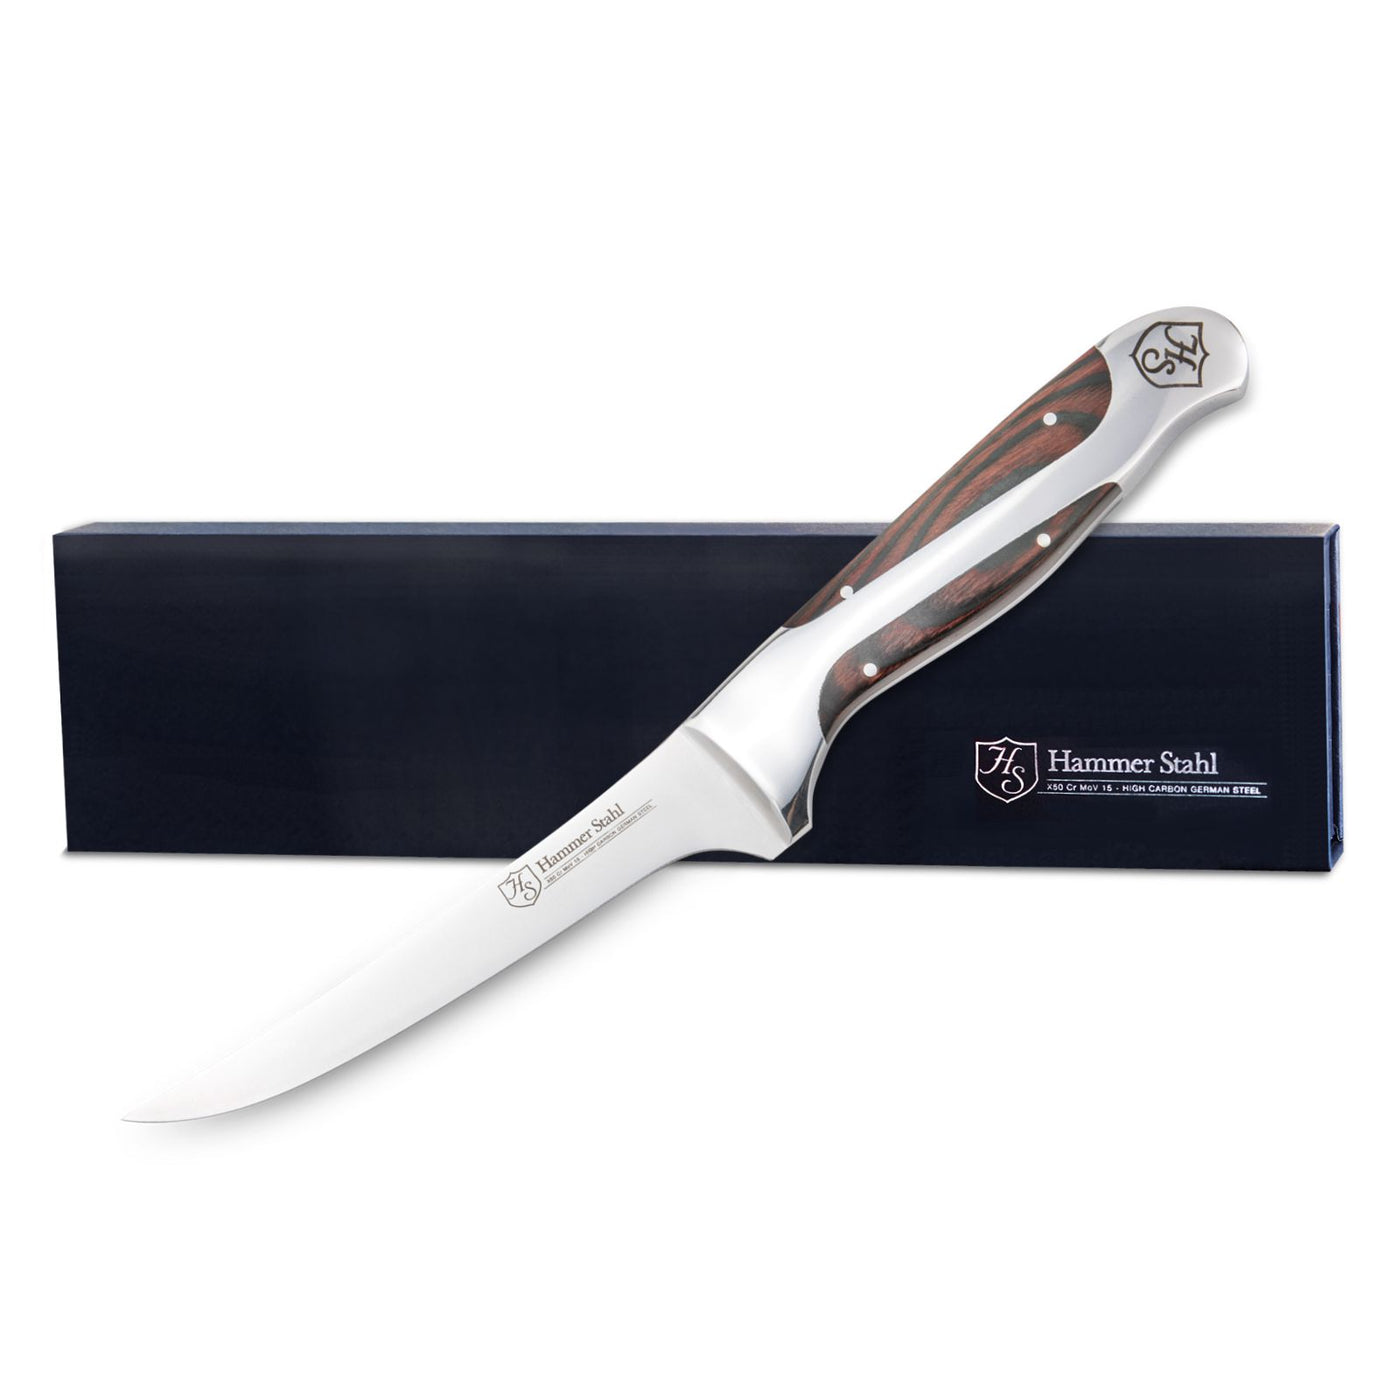 Boxwood Pointed Knife / High Carbon Steel - 12cm – theARKelements